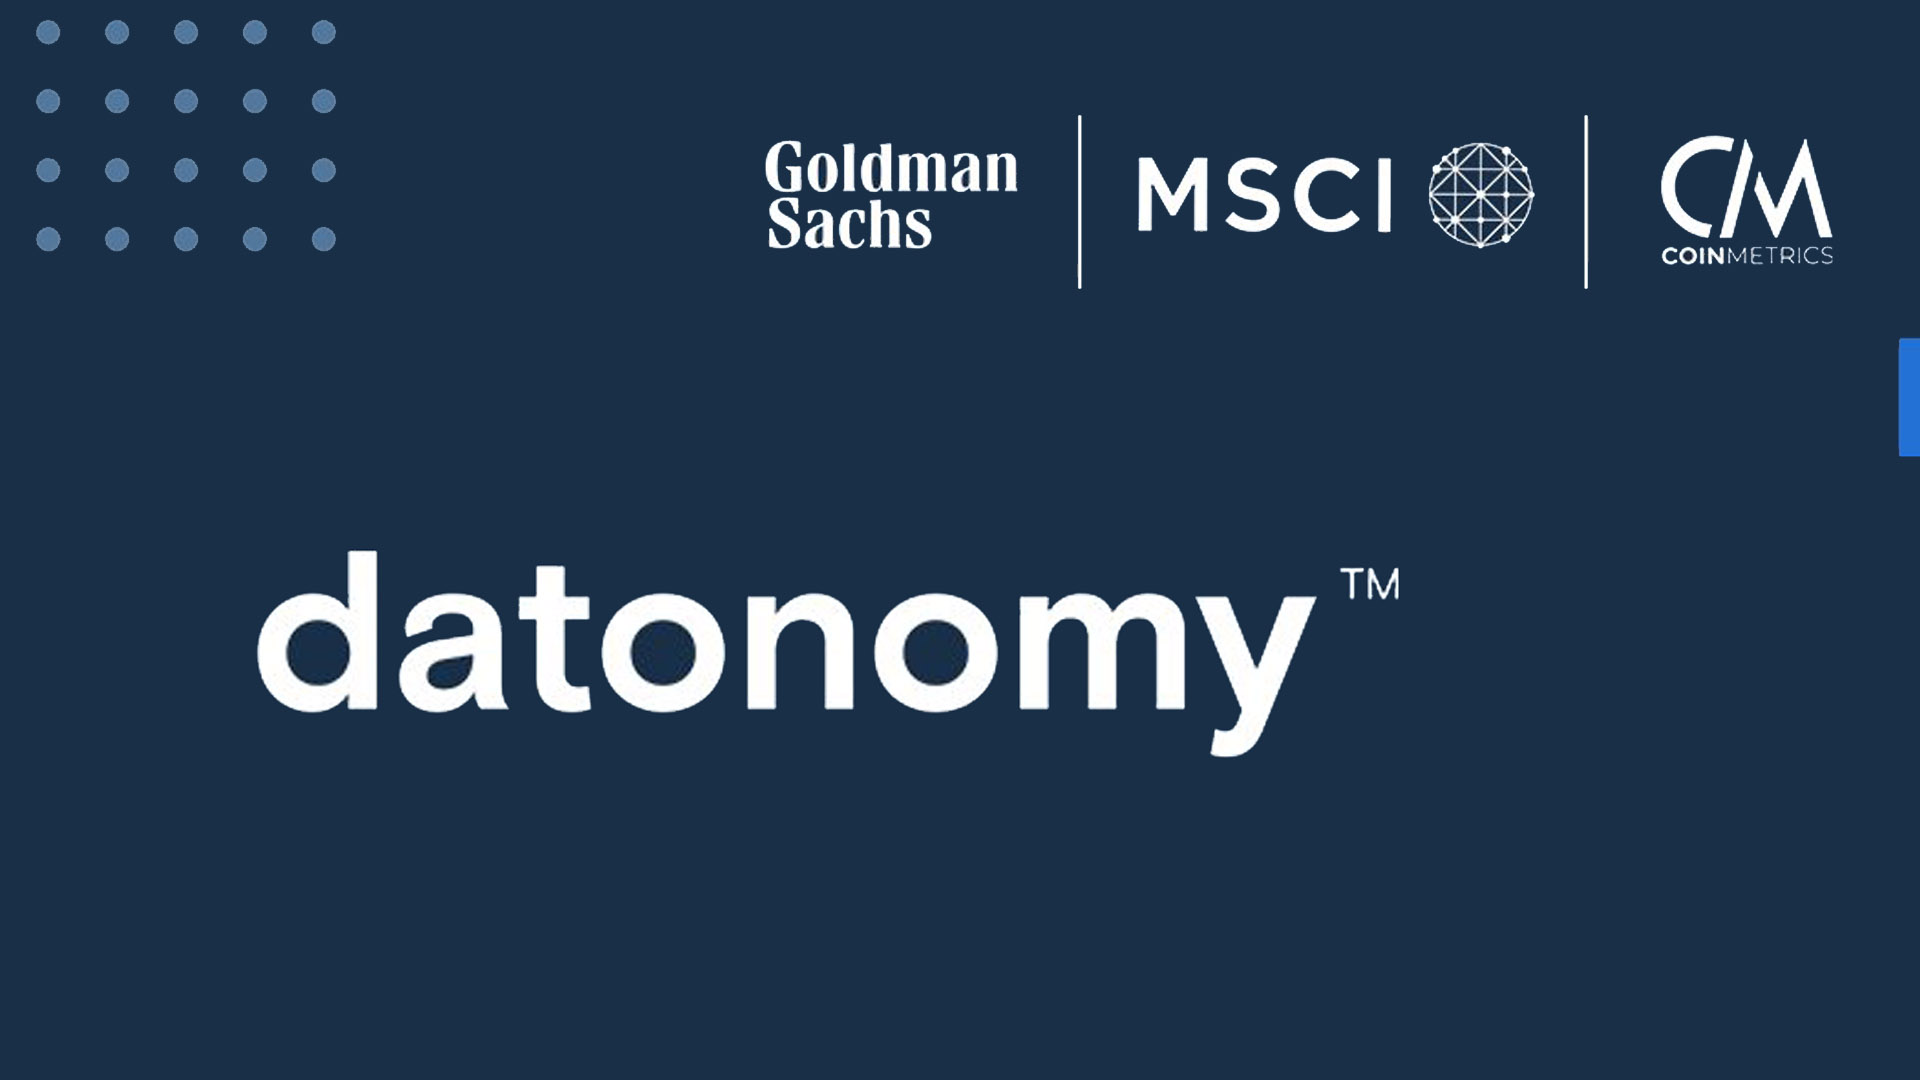 Datanomy – Goldman Sachs is developing a crypto database